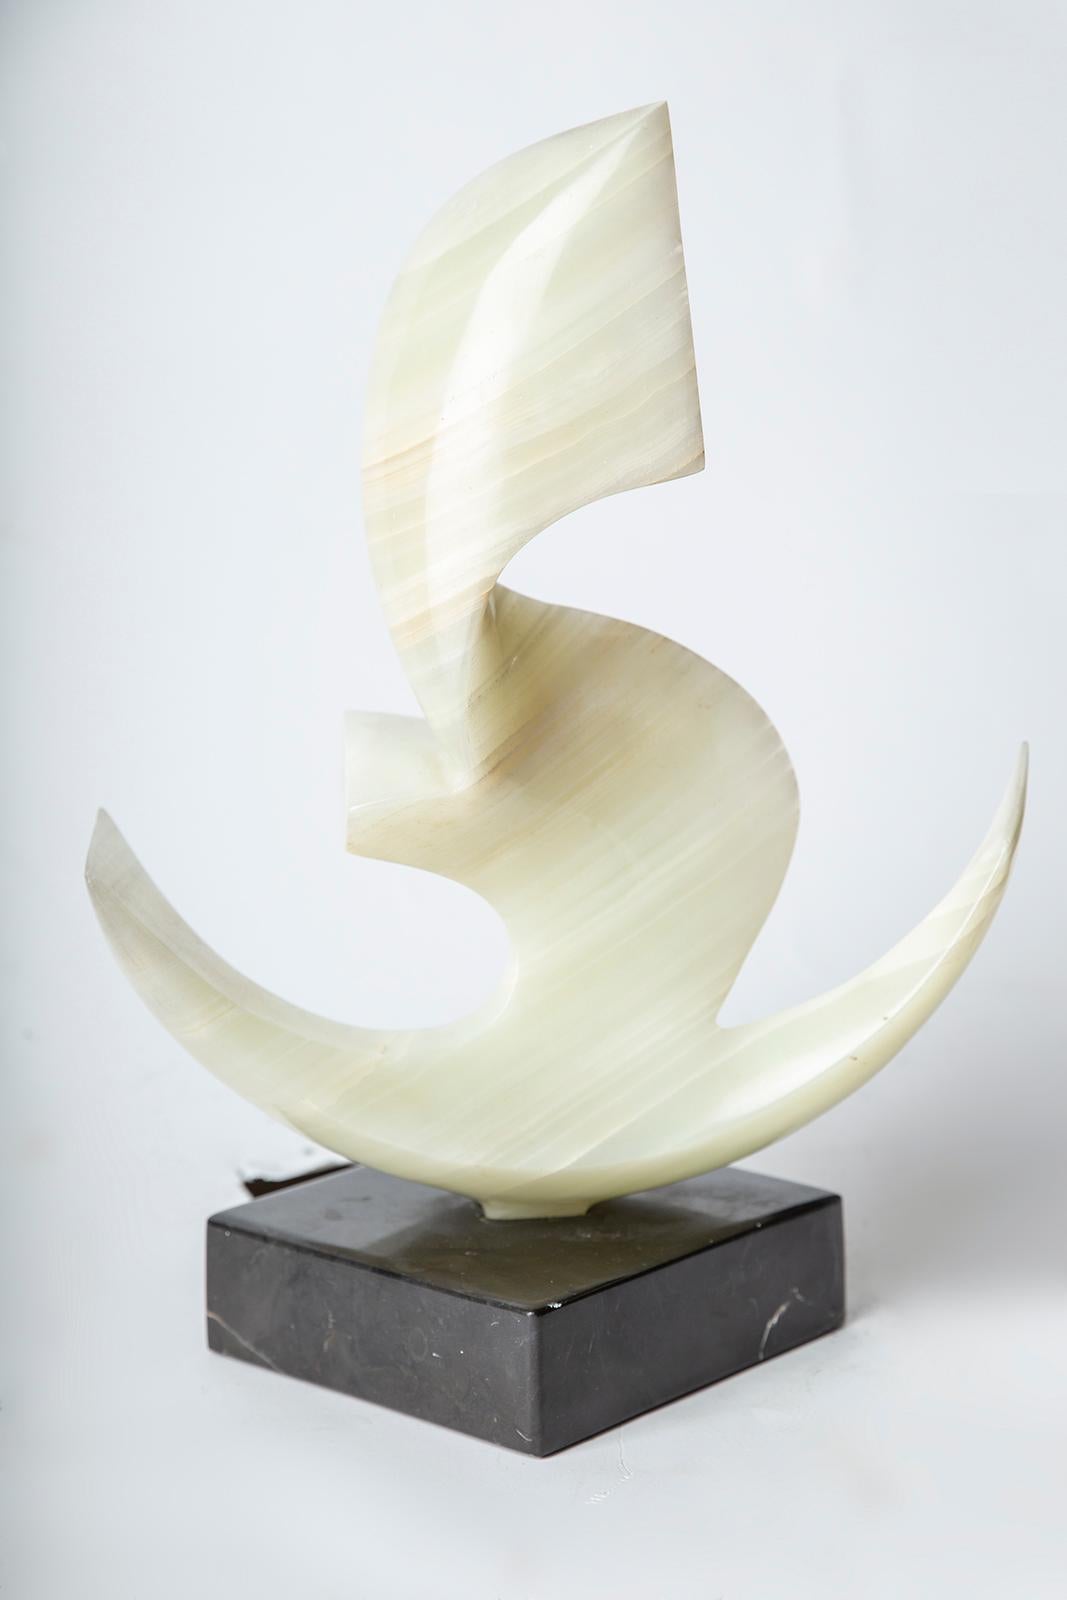 Leonardo Nierman – Anchor
Onyx Sculpture
Size: 15” x 13” x 5”
Signed by the artist
Certificate of Authenticity included

With his awe-inspiring abstract art, Leonardo Nierman reaches deeply into the recesses of human consciousness. The university